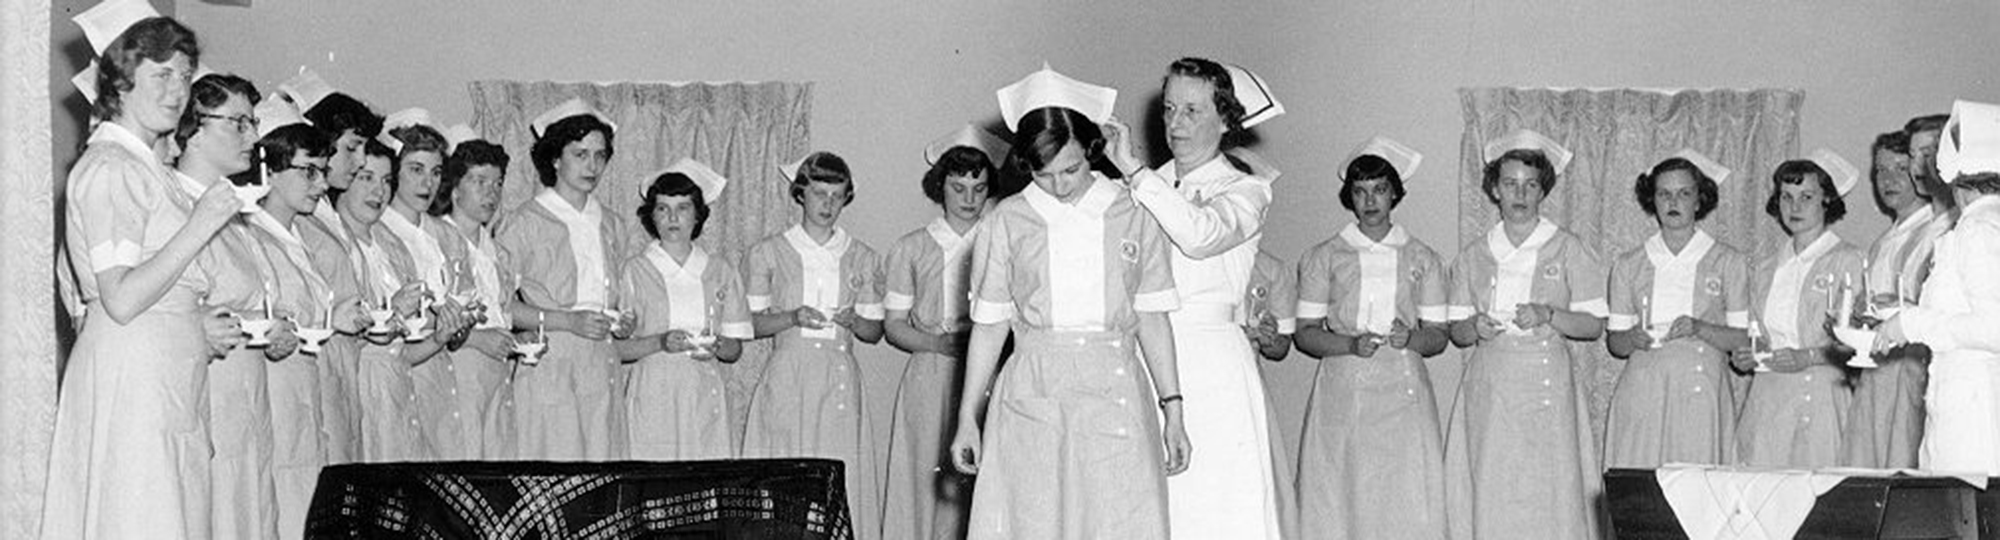 A black and white photo shows a group of nurses having hats pinned to their heads